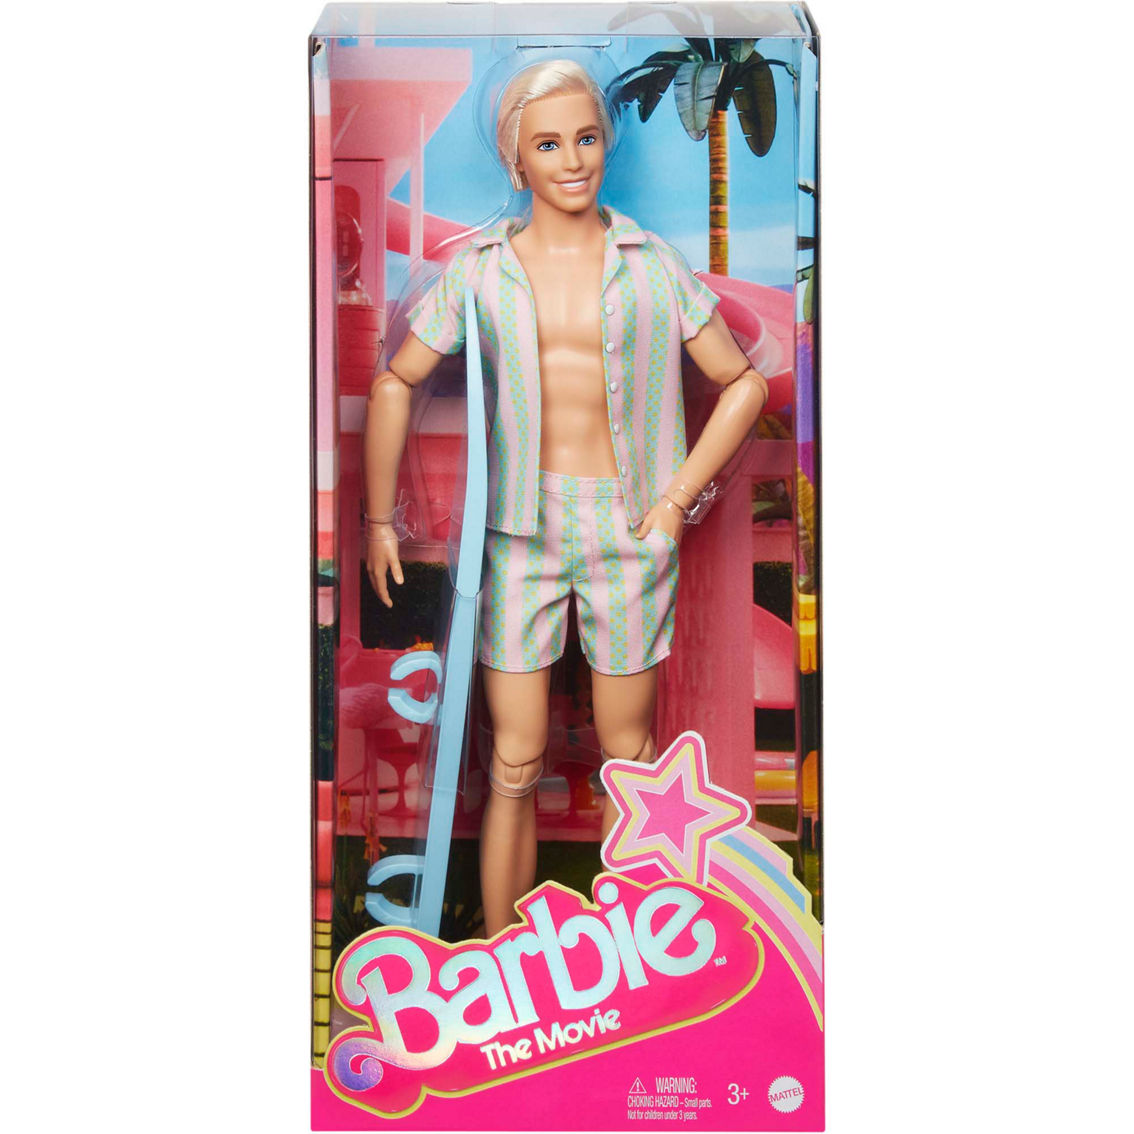 Mattel Barbie Movie Ken Doll, Striped Outfit, Dolls, Baby & Toys